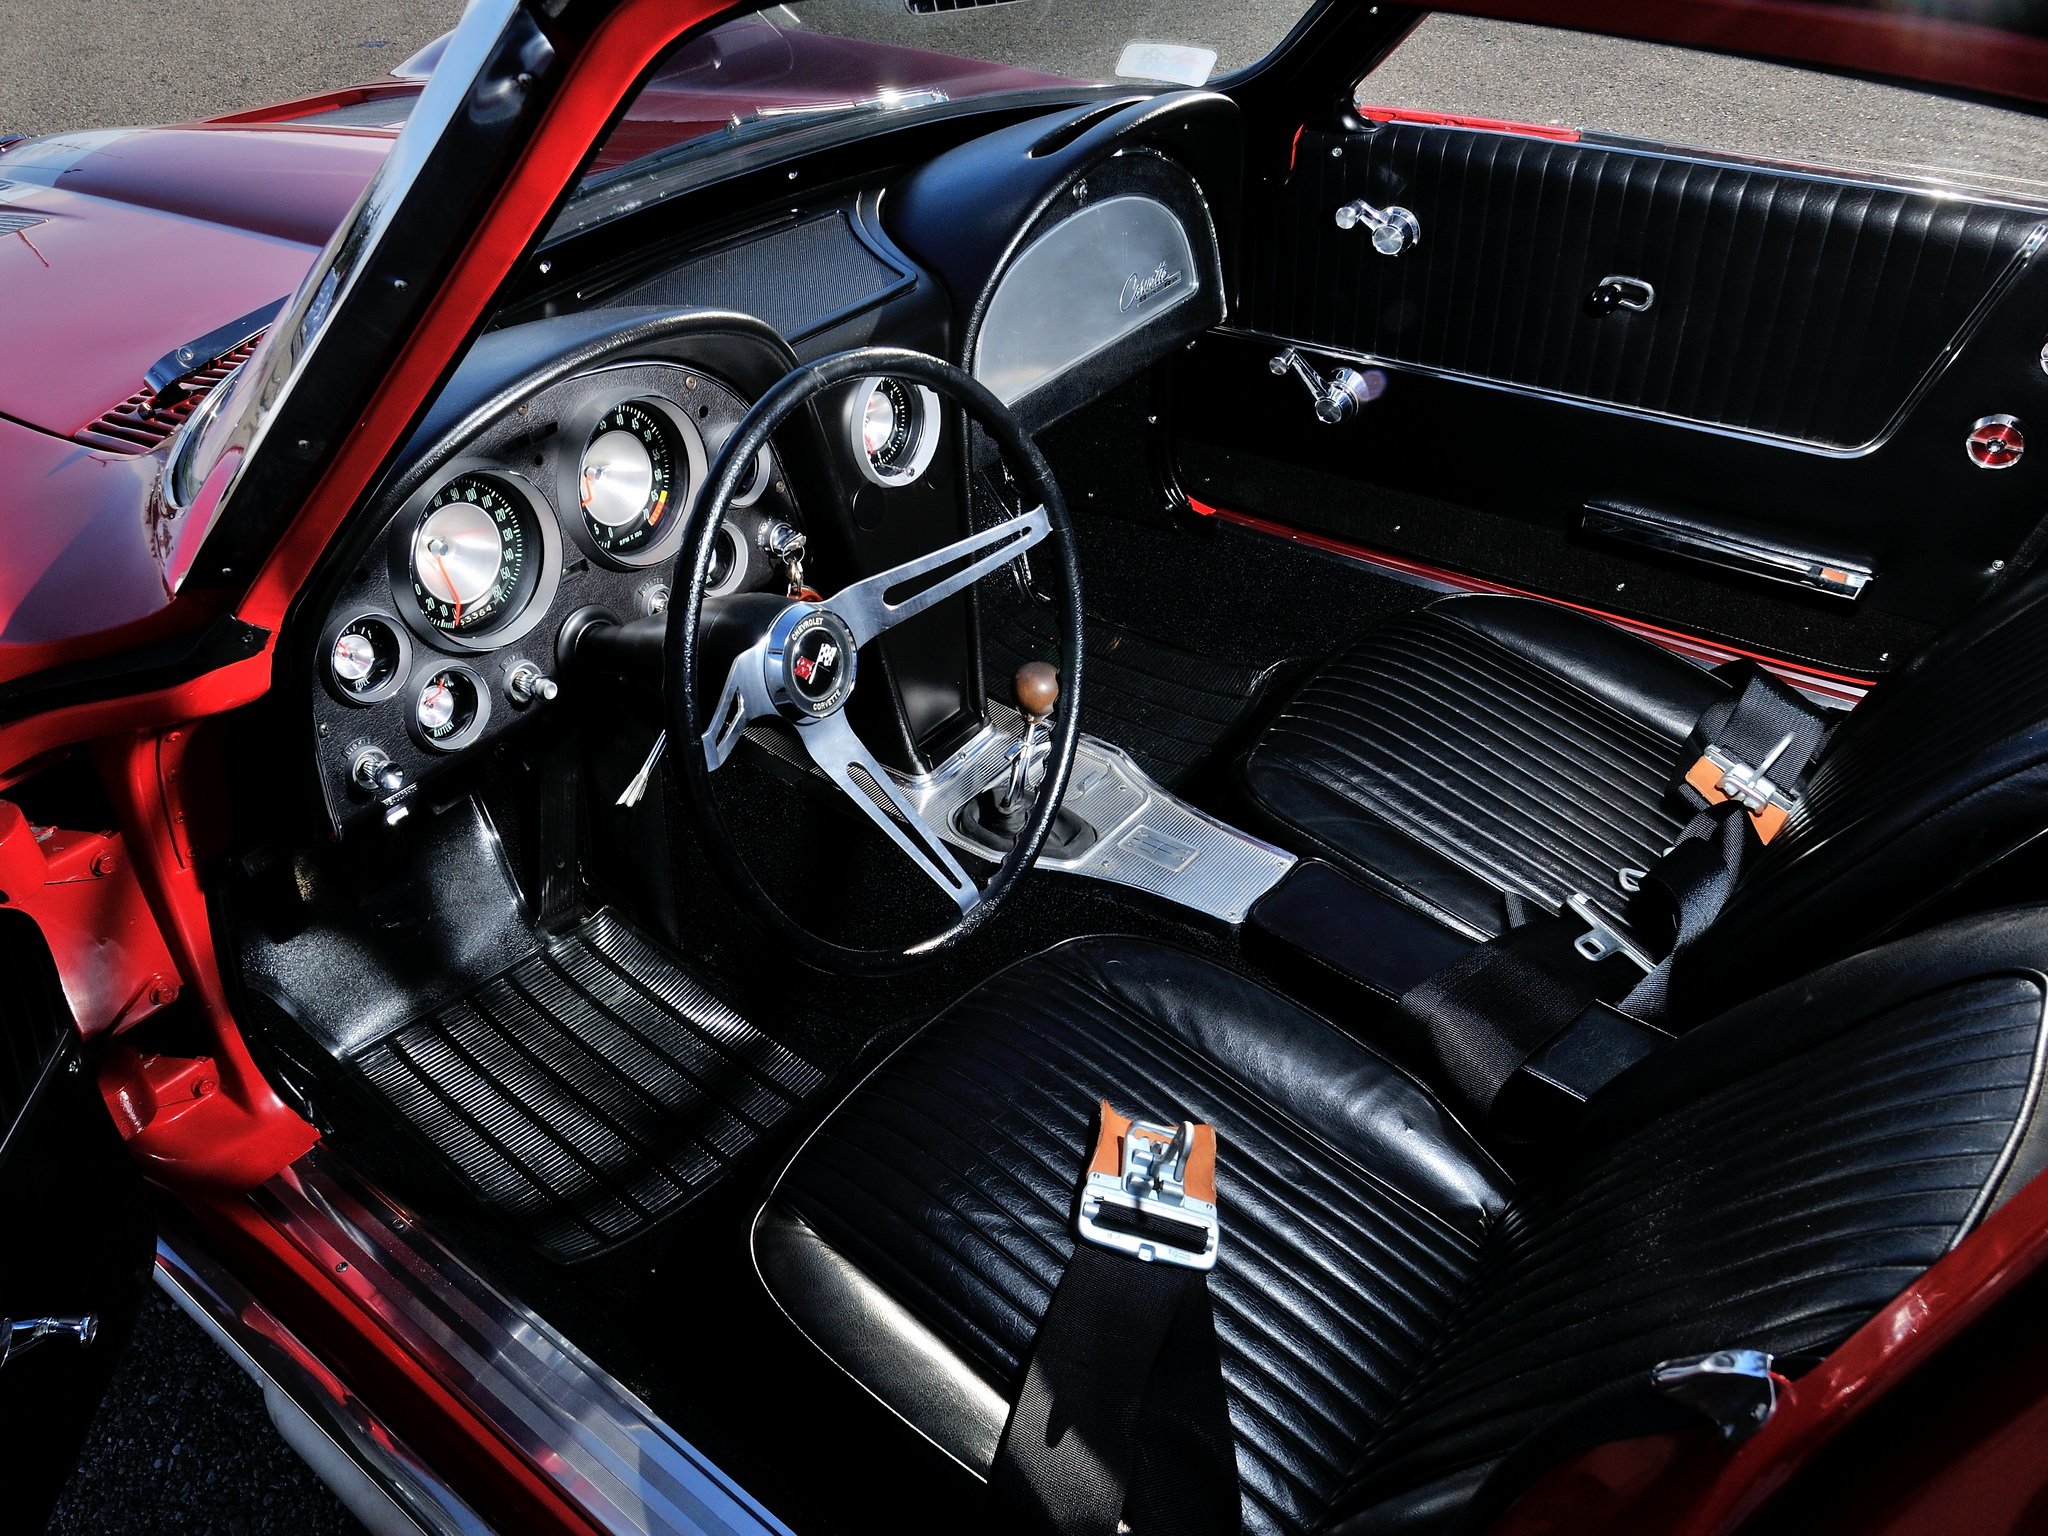 1963, Chevrolet, Corvette, Sting, Ray, Race, 7 11,  c 2 , Racing, Muscle, Hot, Rod, Rods, Classic Wallpaper